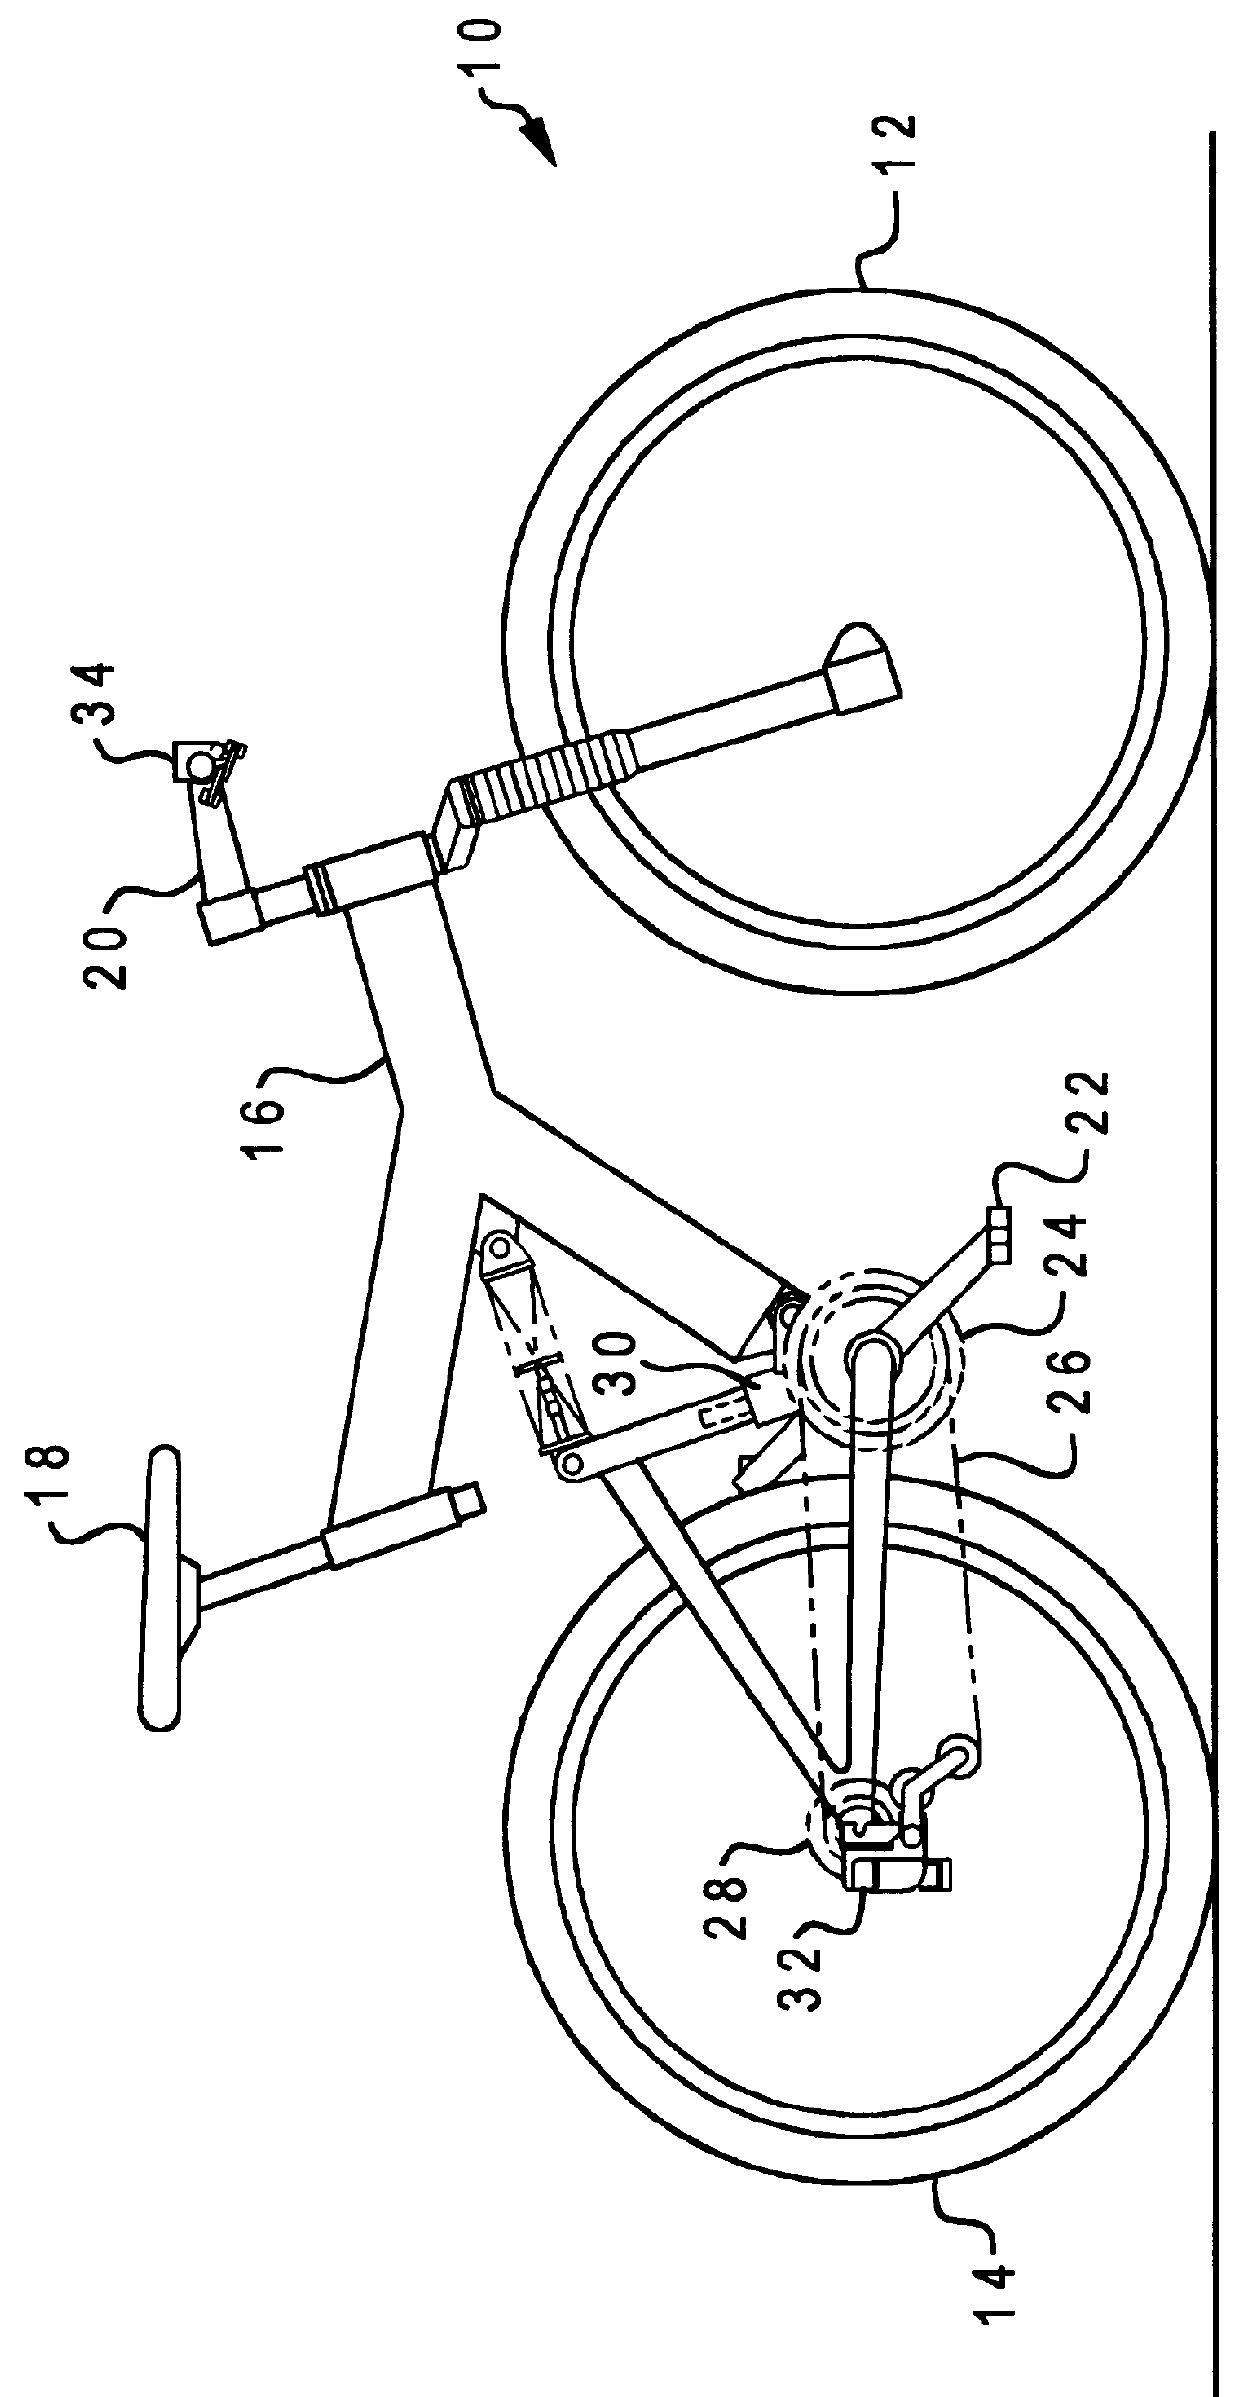 Hydraulically-operated bicycle shifting system with positive pressure actuation